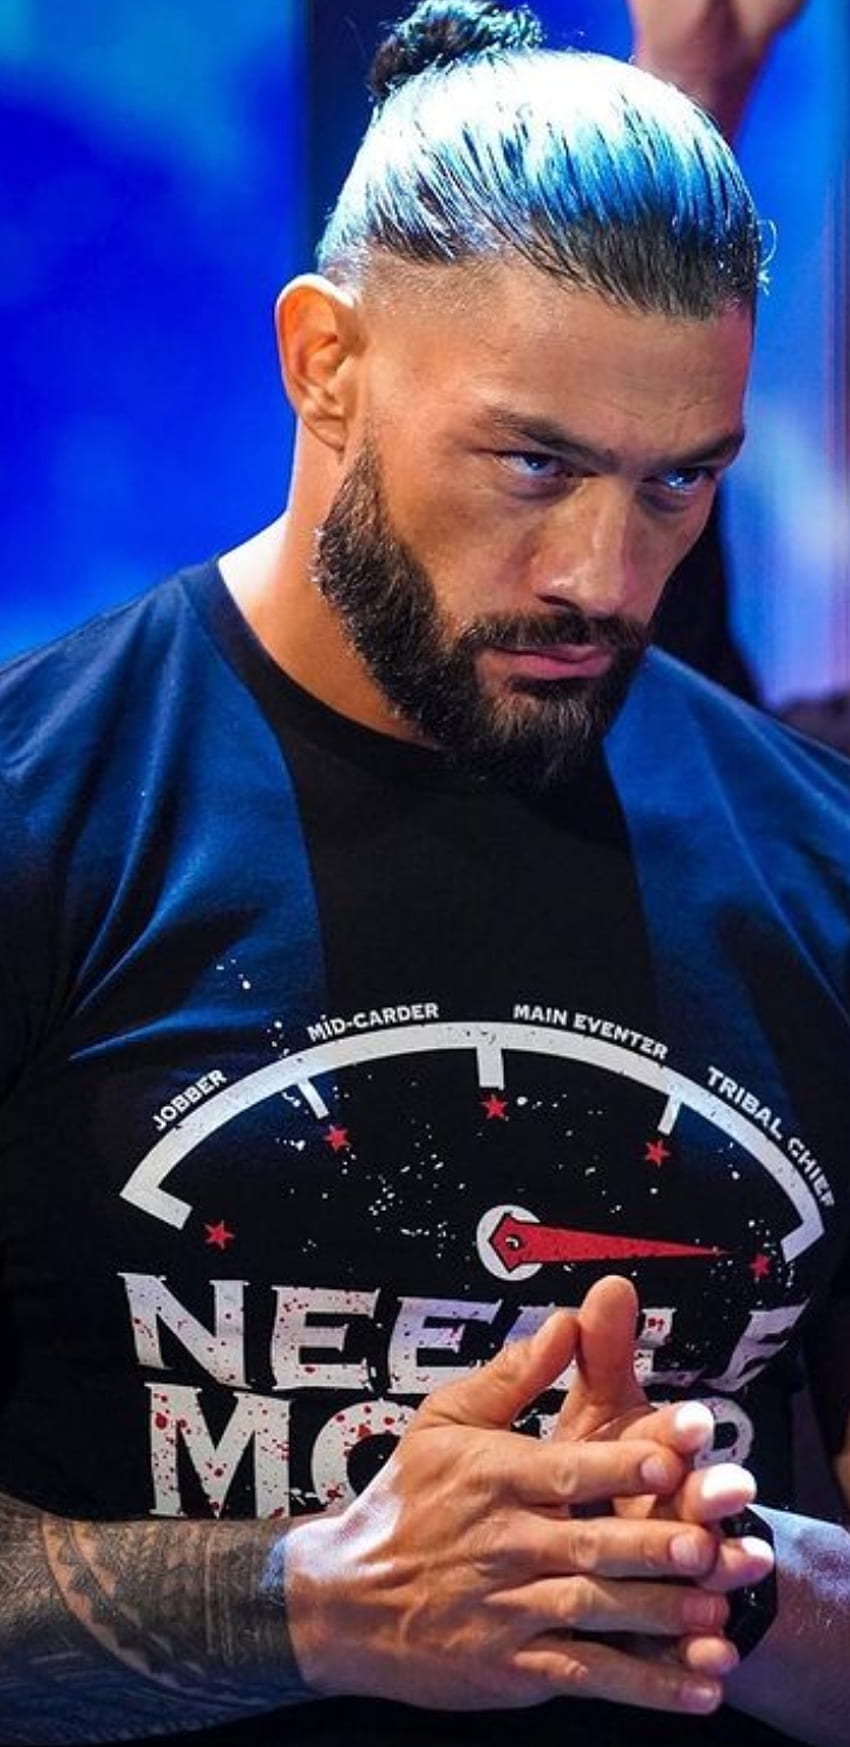 Adding More Realism to Roman Reigns Persona Will Endear Him to WWE Audience  | News, Scores, Highlights, Stats, and Rumors | Bleacher Report